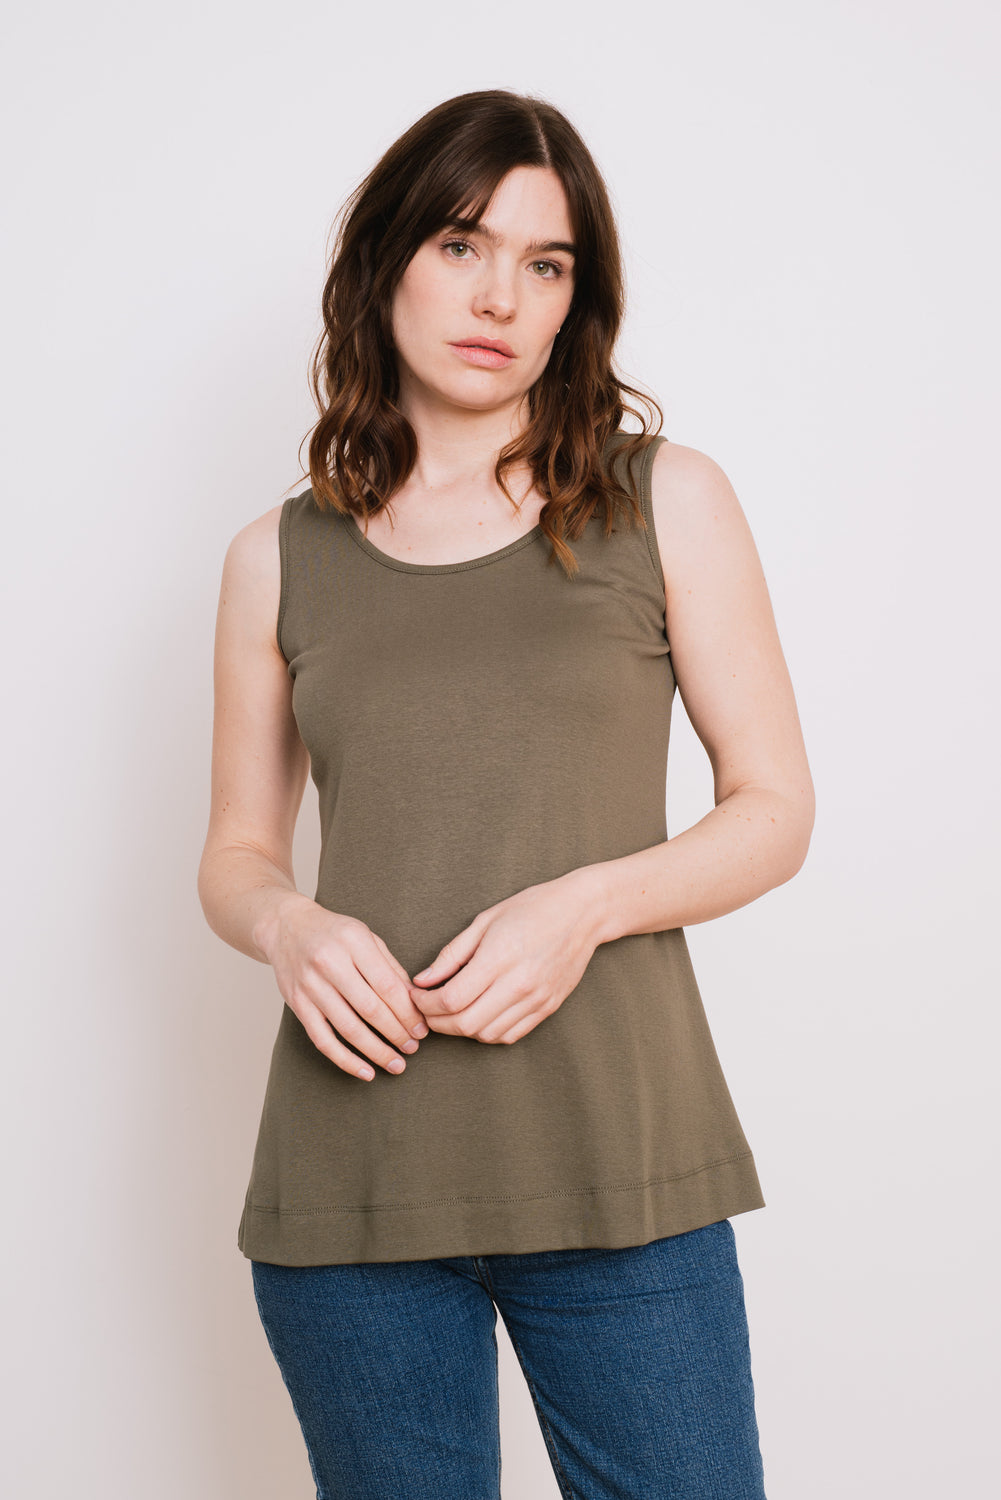 Cotton A-Line Tank, Capers